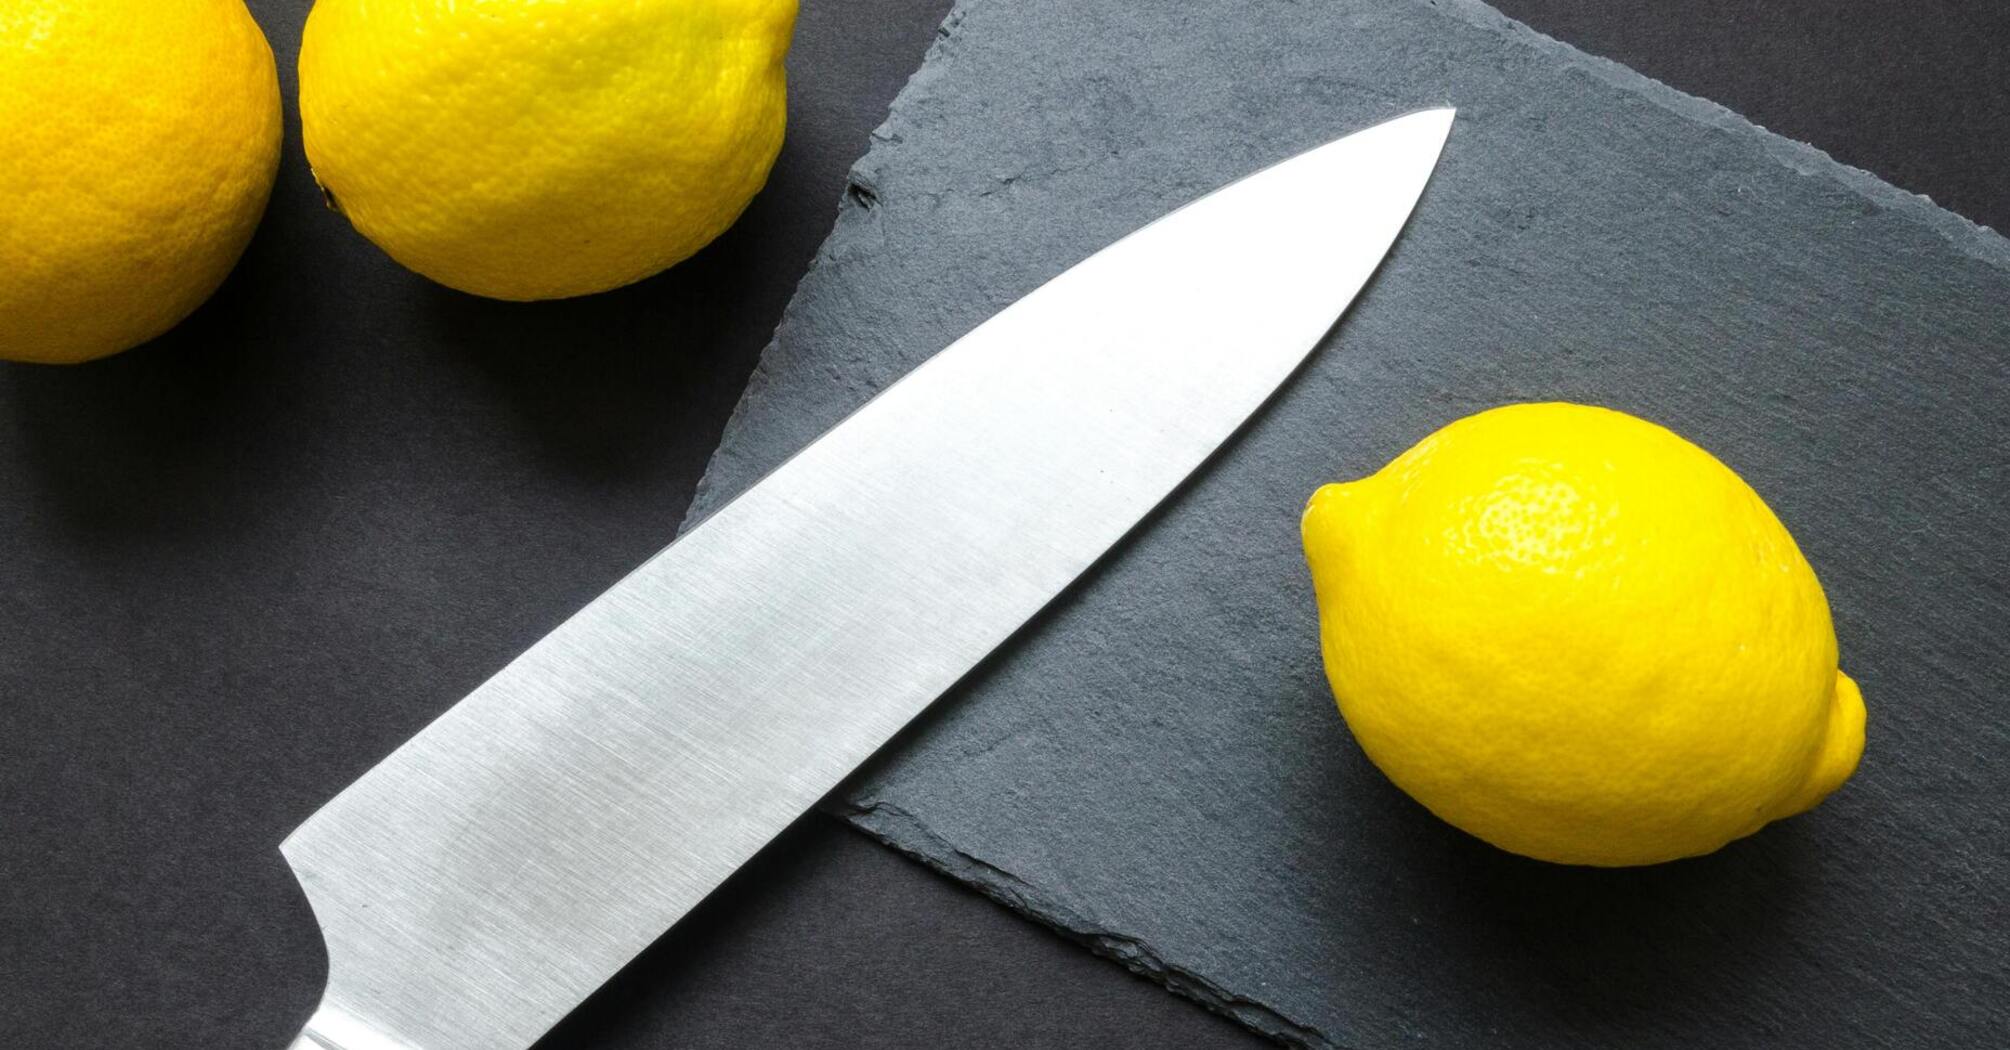 What can ruin an expensive kitchen knife: 4 common mistakes